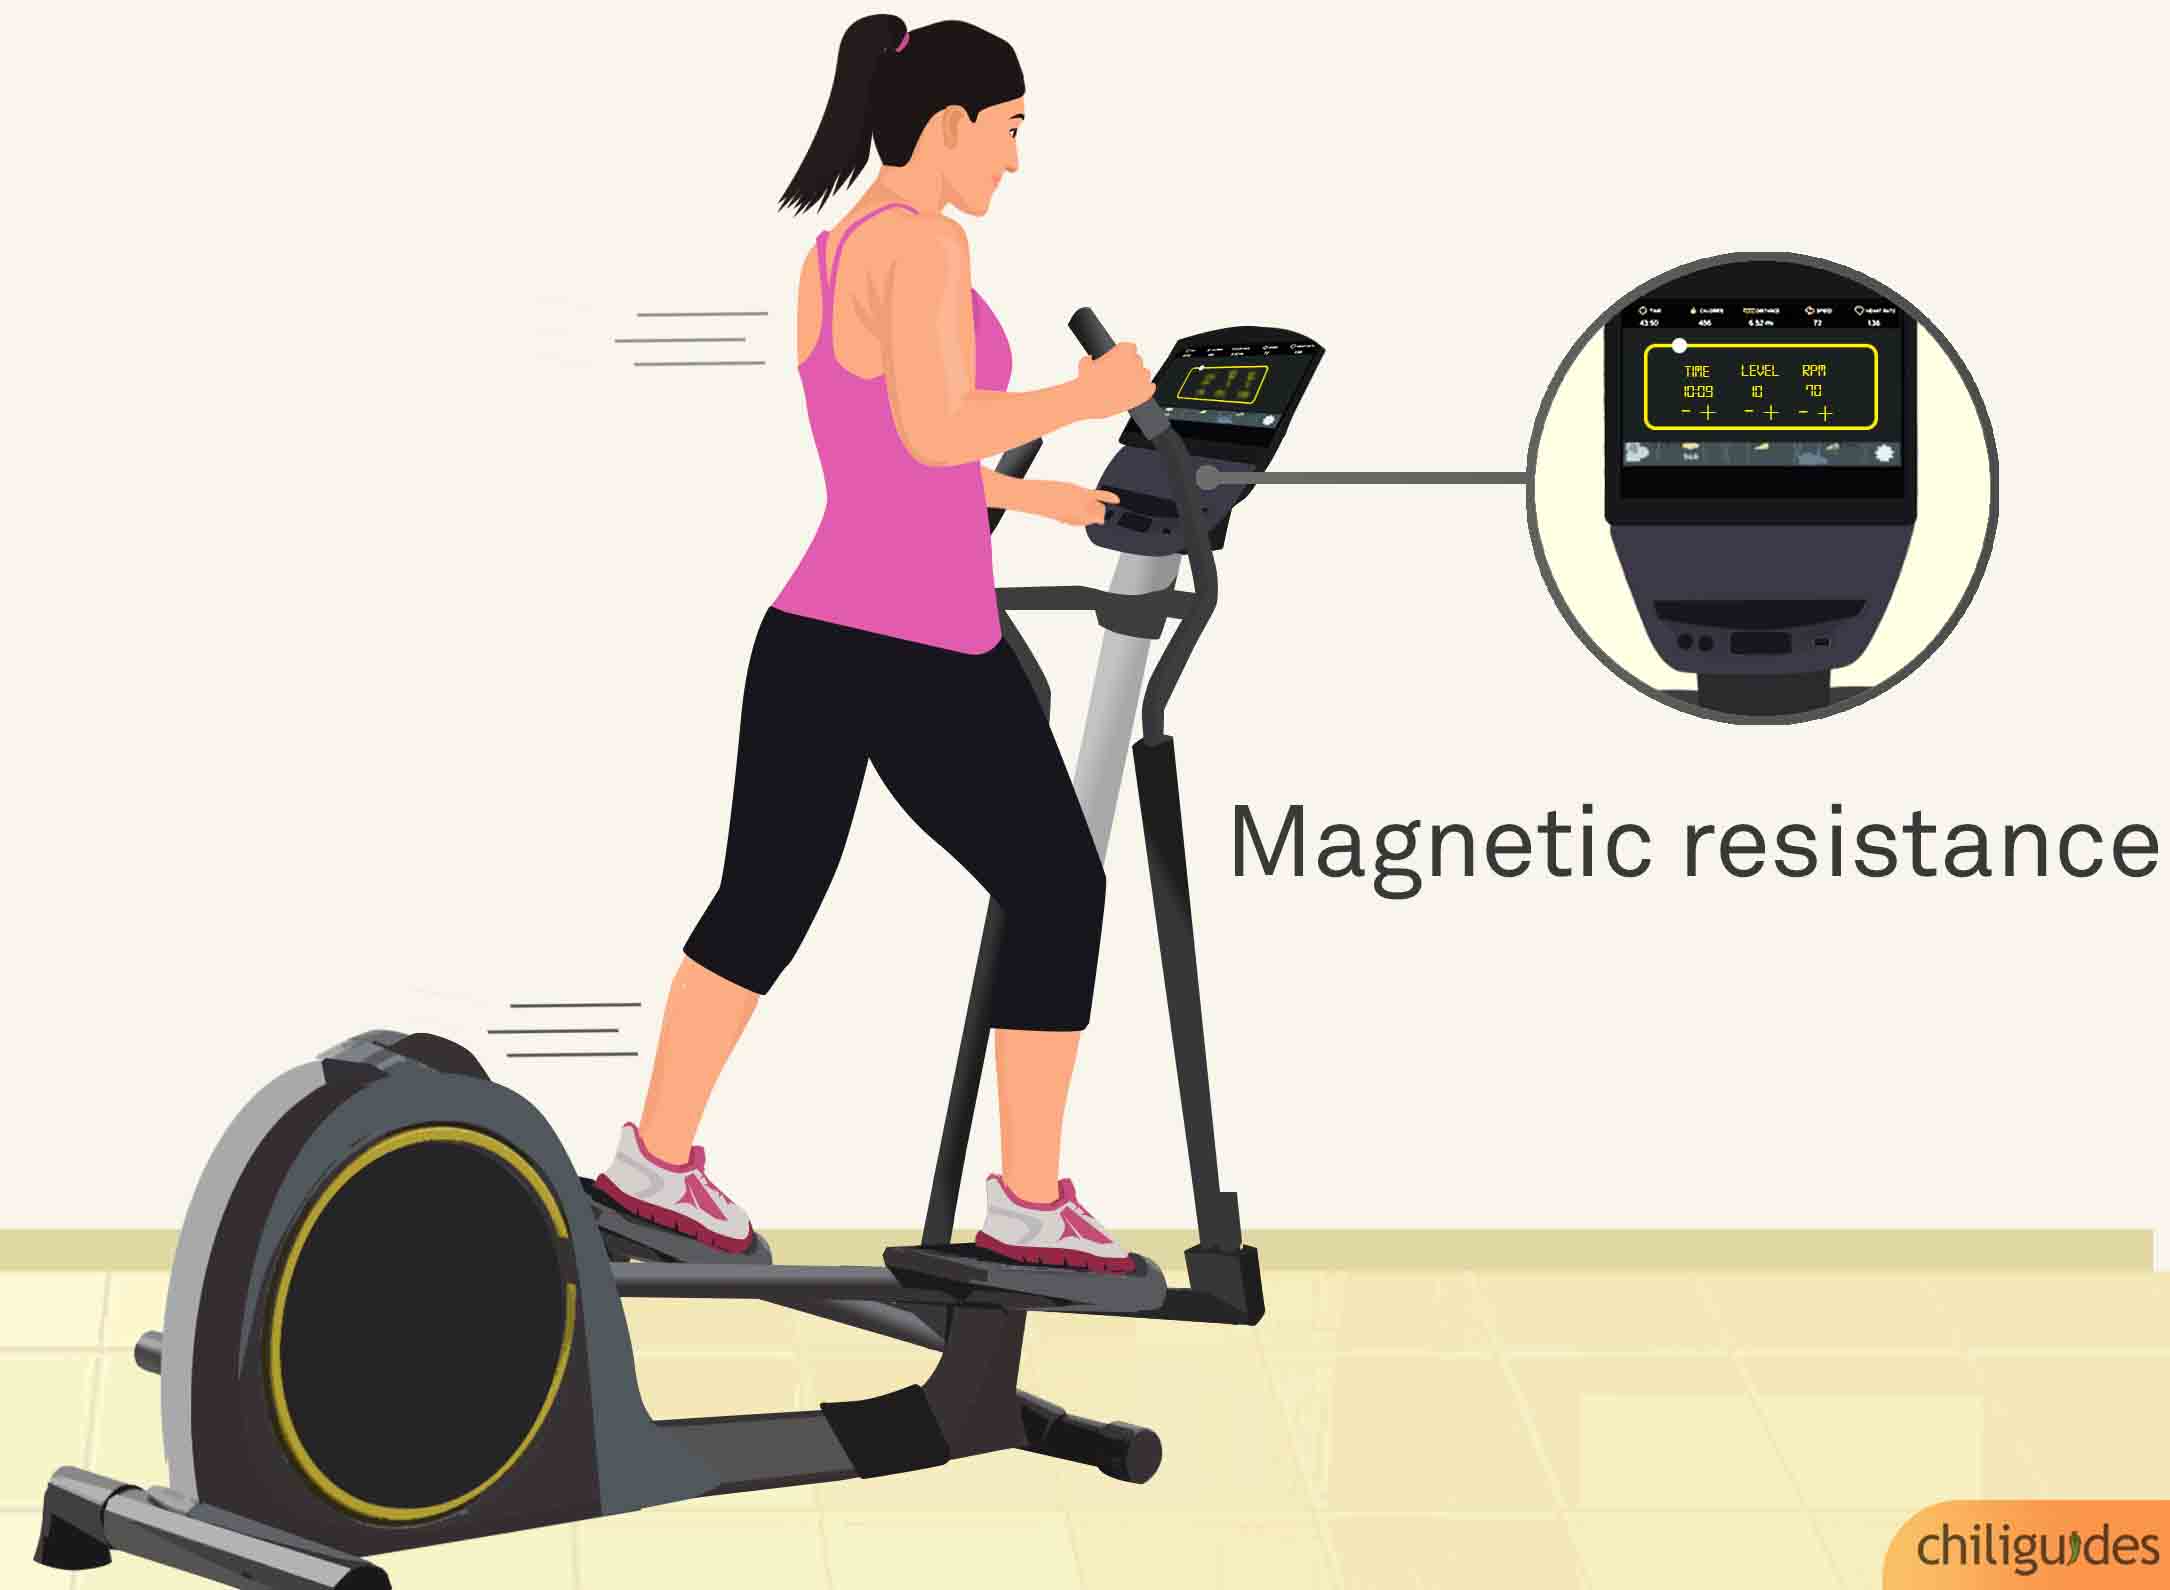 The machine should have magnetic resistance.